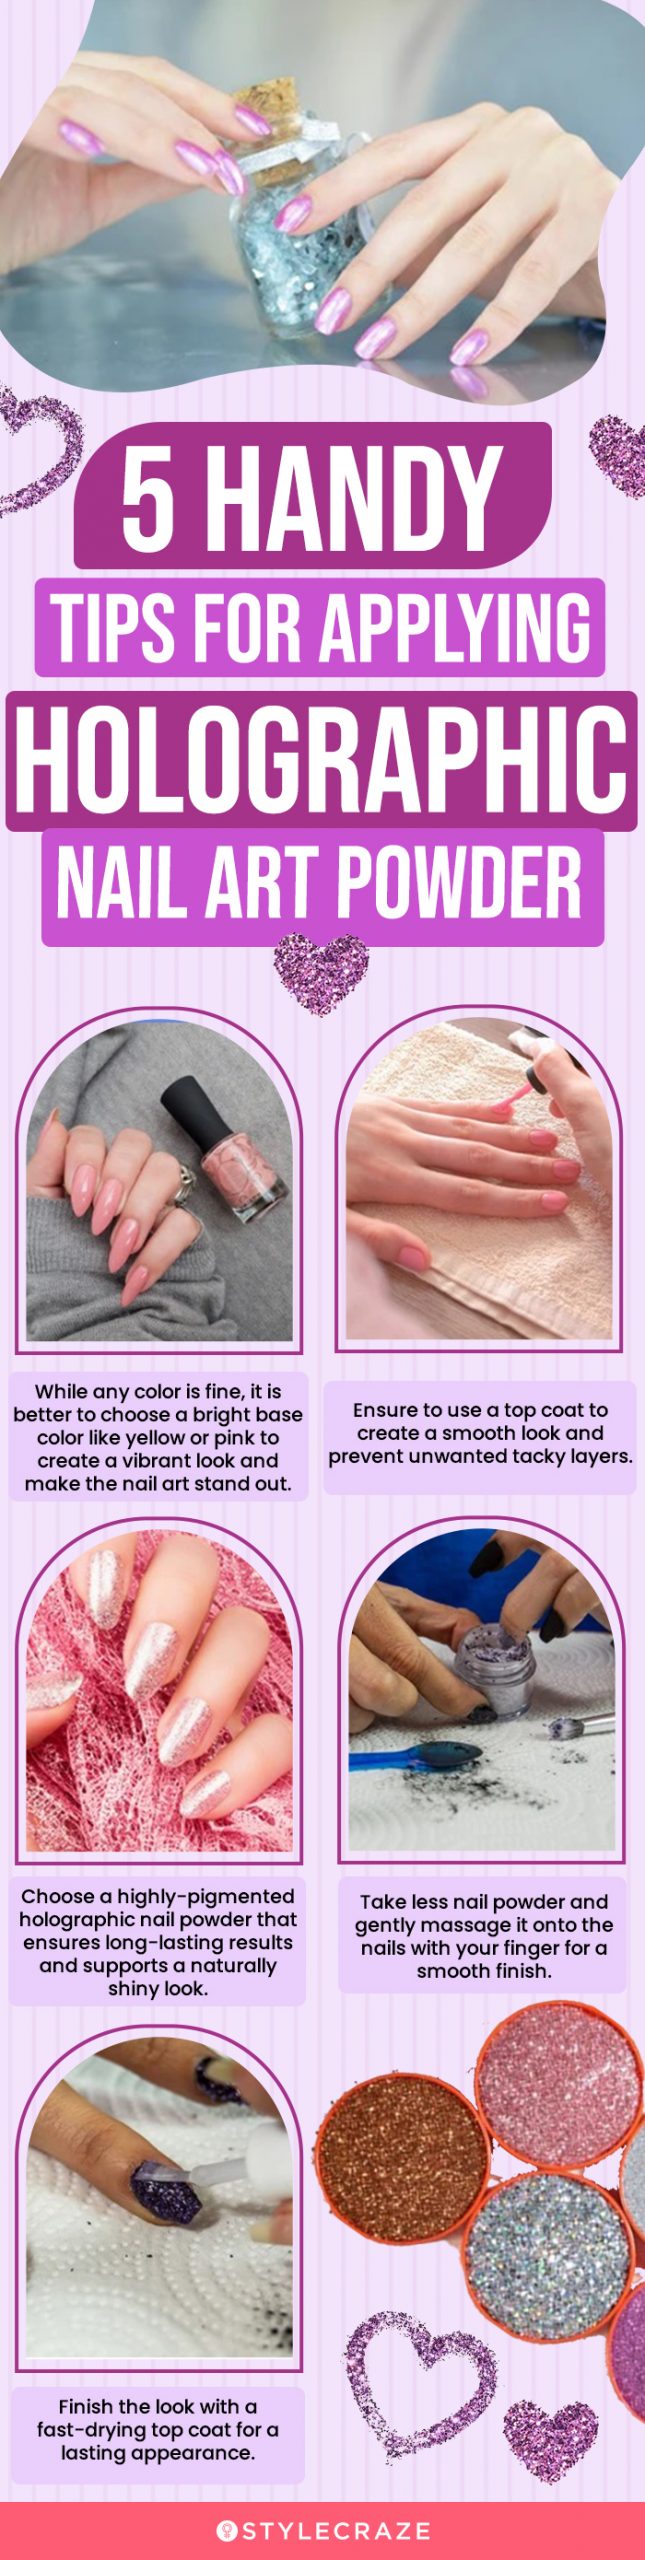 5 Handy Tips For Applying Holographic Nail Art Powder (infographic)